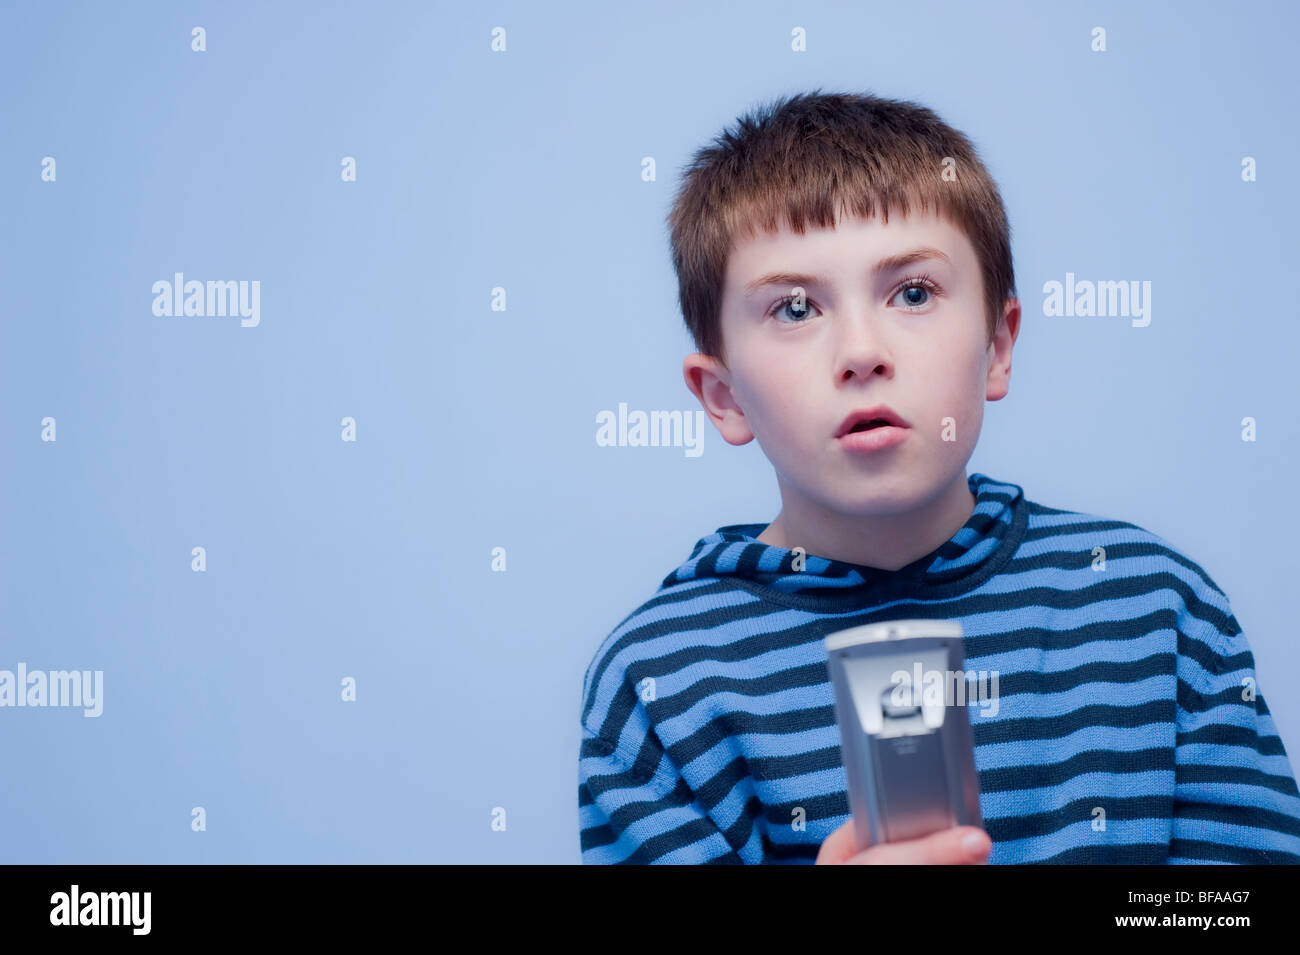 A Model Released picture of a ten year old boy with the Tv remote control indoors in the Uk Stock Photo